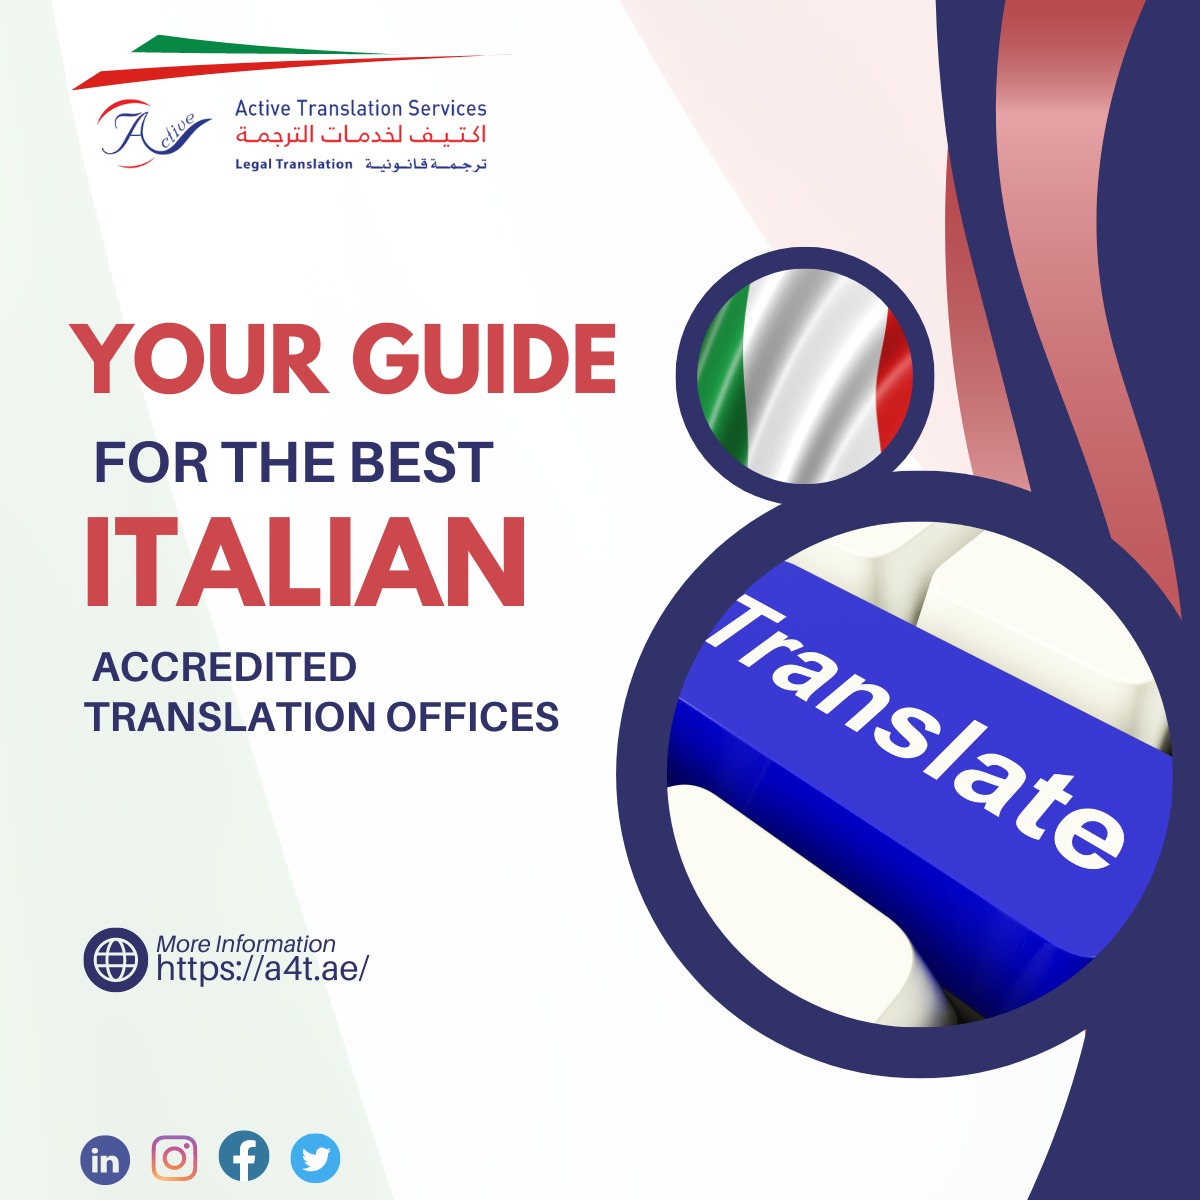 Italian accredited translation offices